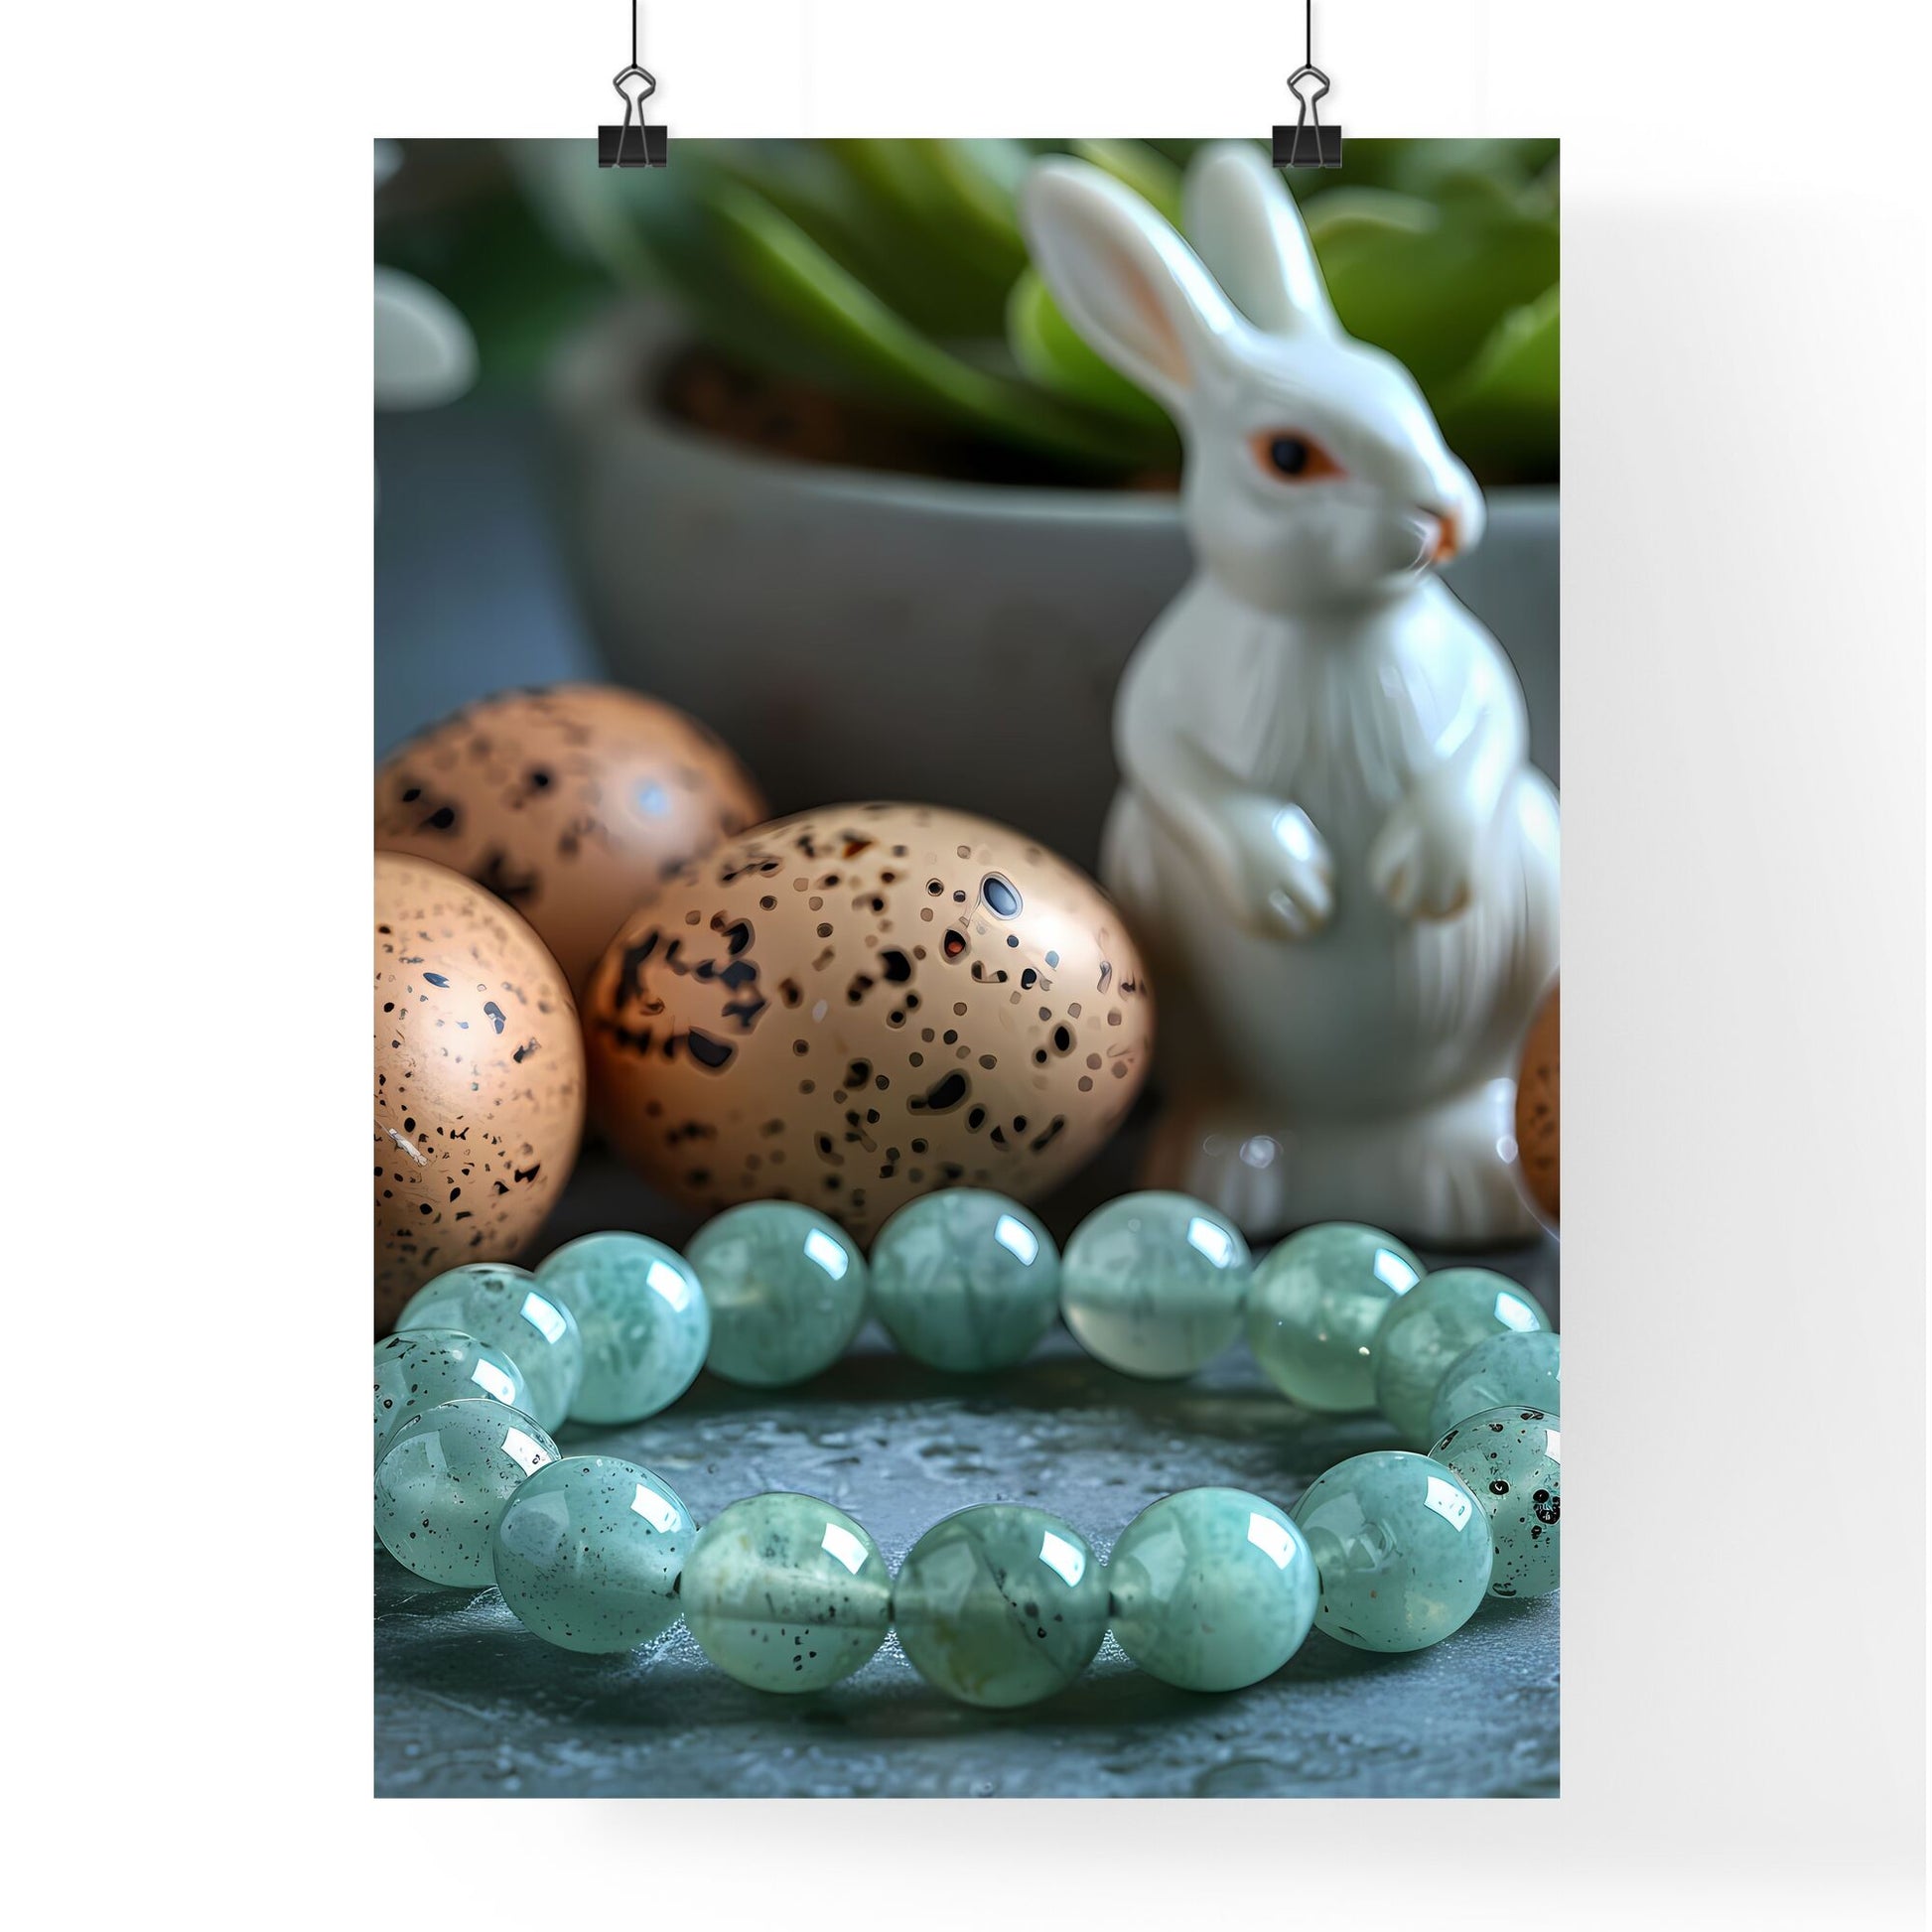 Vibrant art featuring Easter bunny figurines, eggs, and a pastel green glass bangle bracelet Default Title